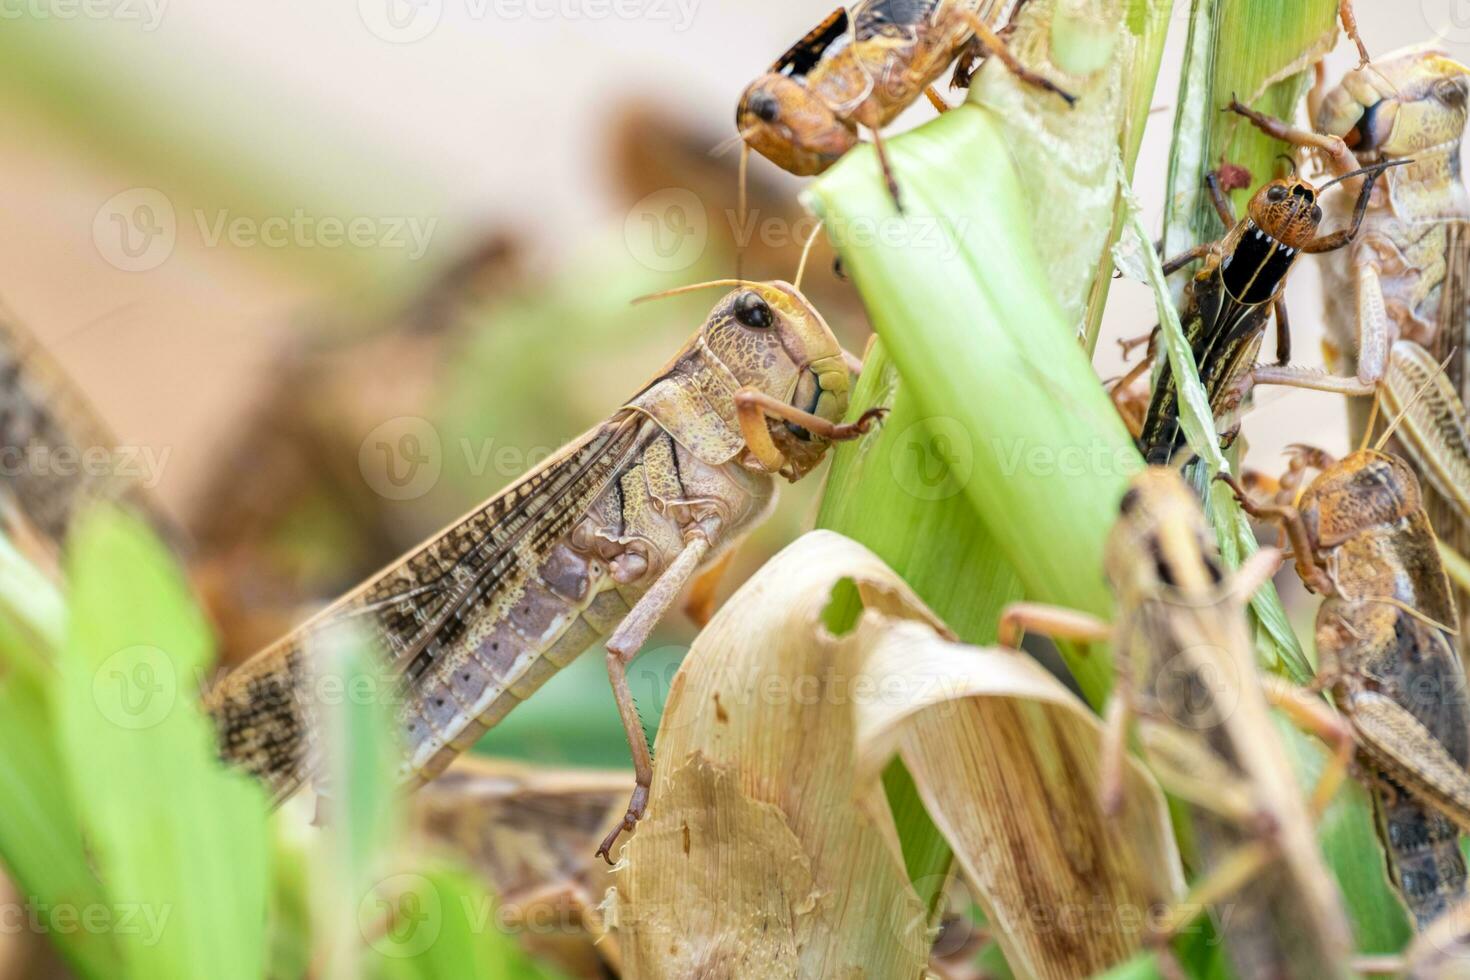 Grasshopper Patanga eating a leaf with gusto, Patanga on hanging grass in Grasshopper farm photo